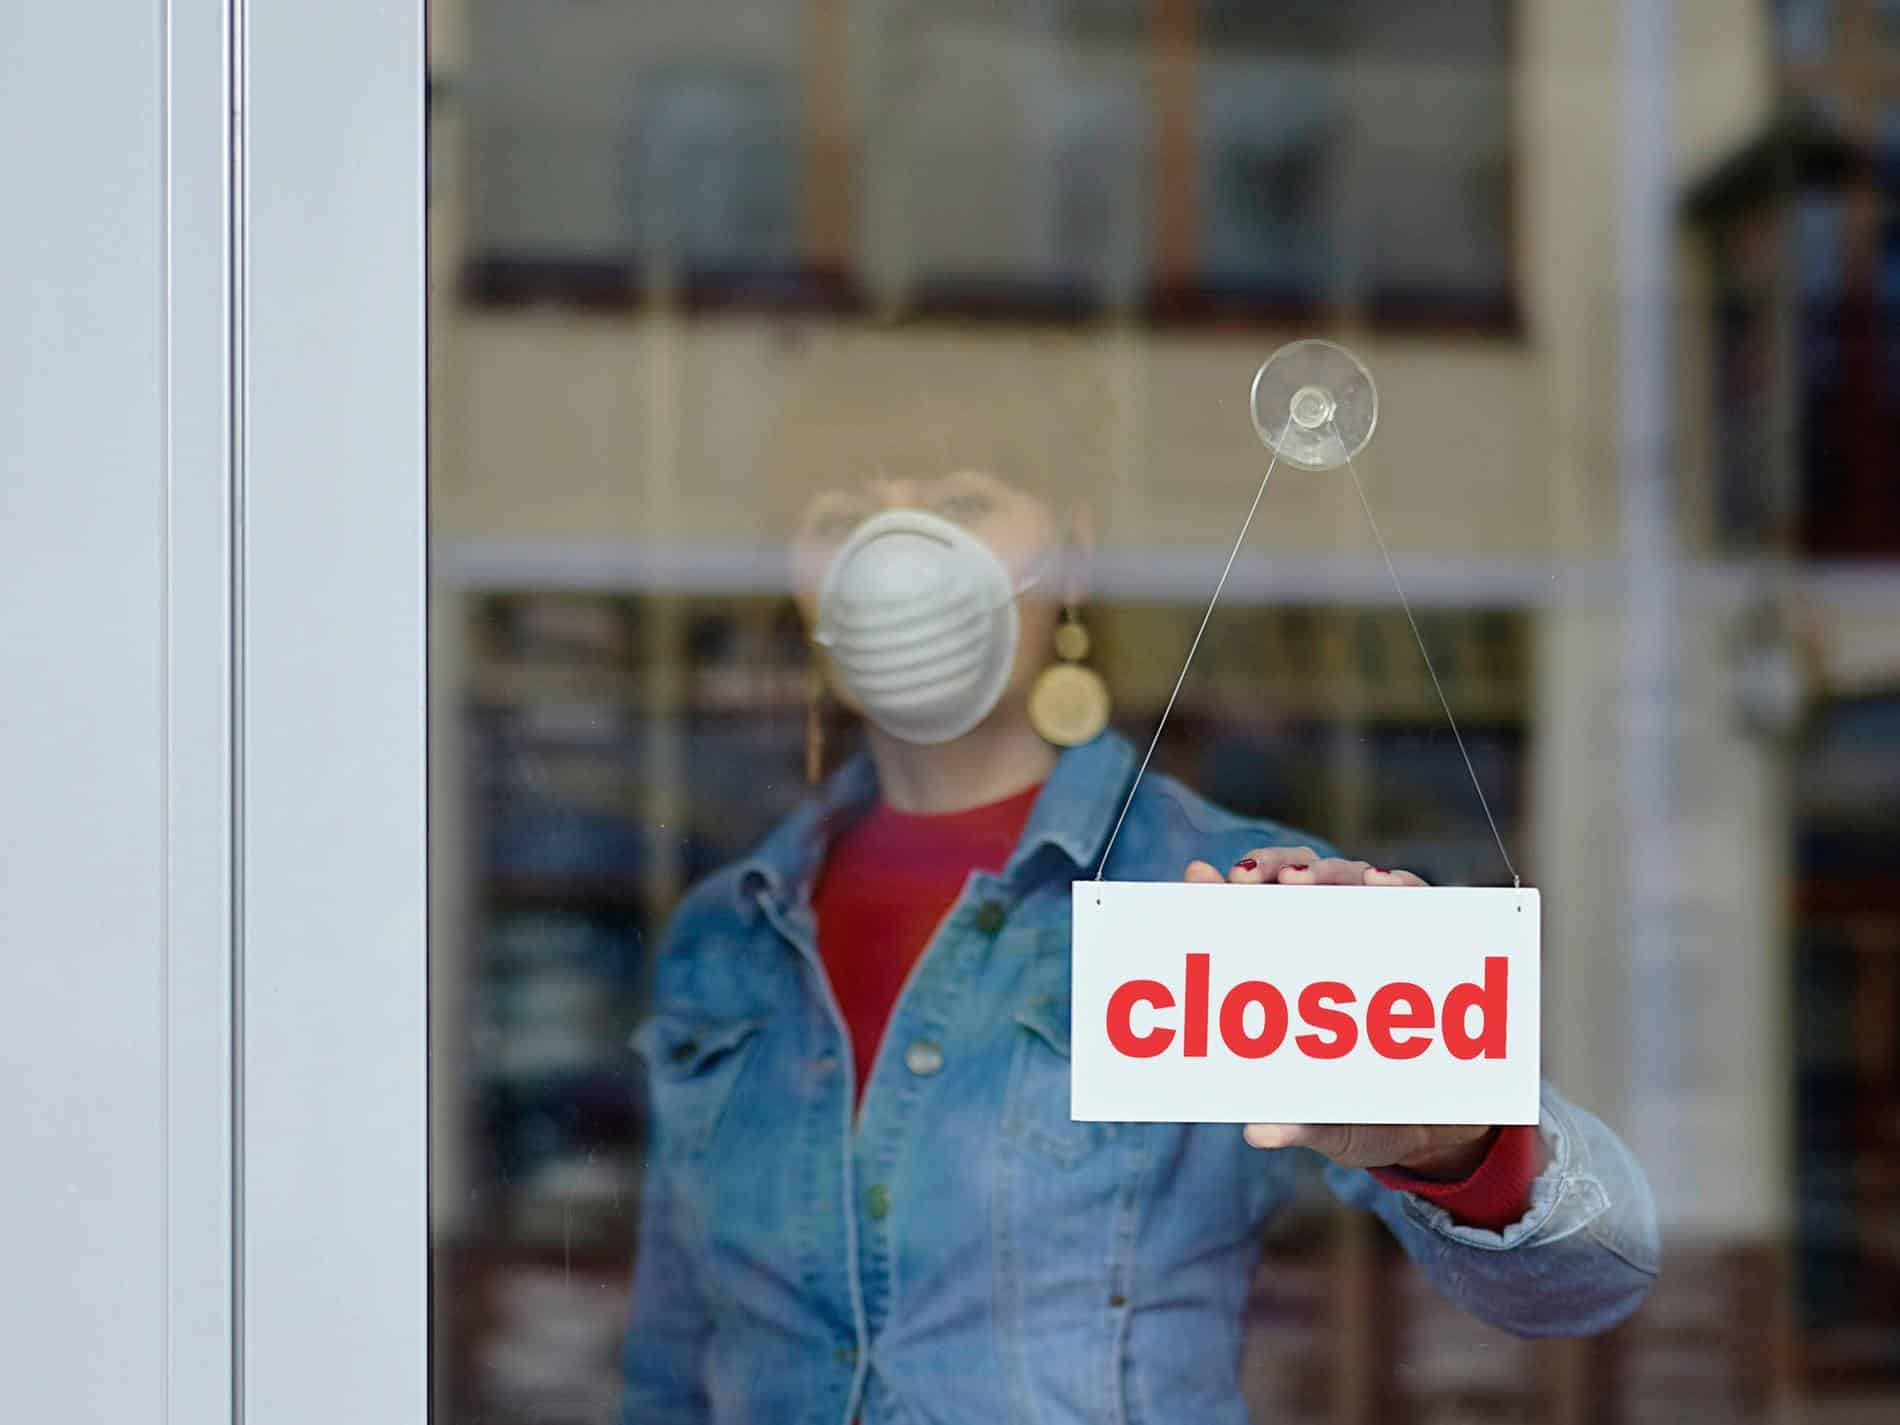 
                     woman in closed shop with mask - your text closed
                     